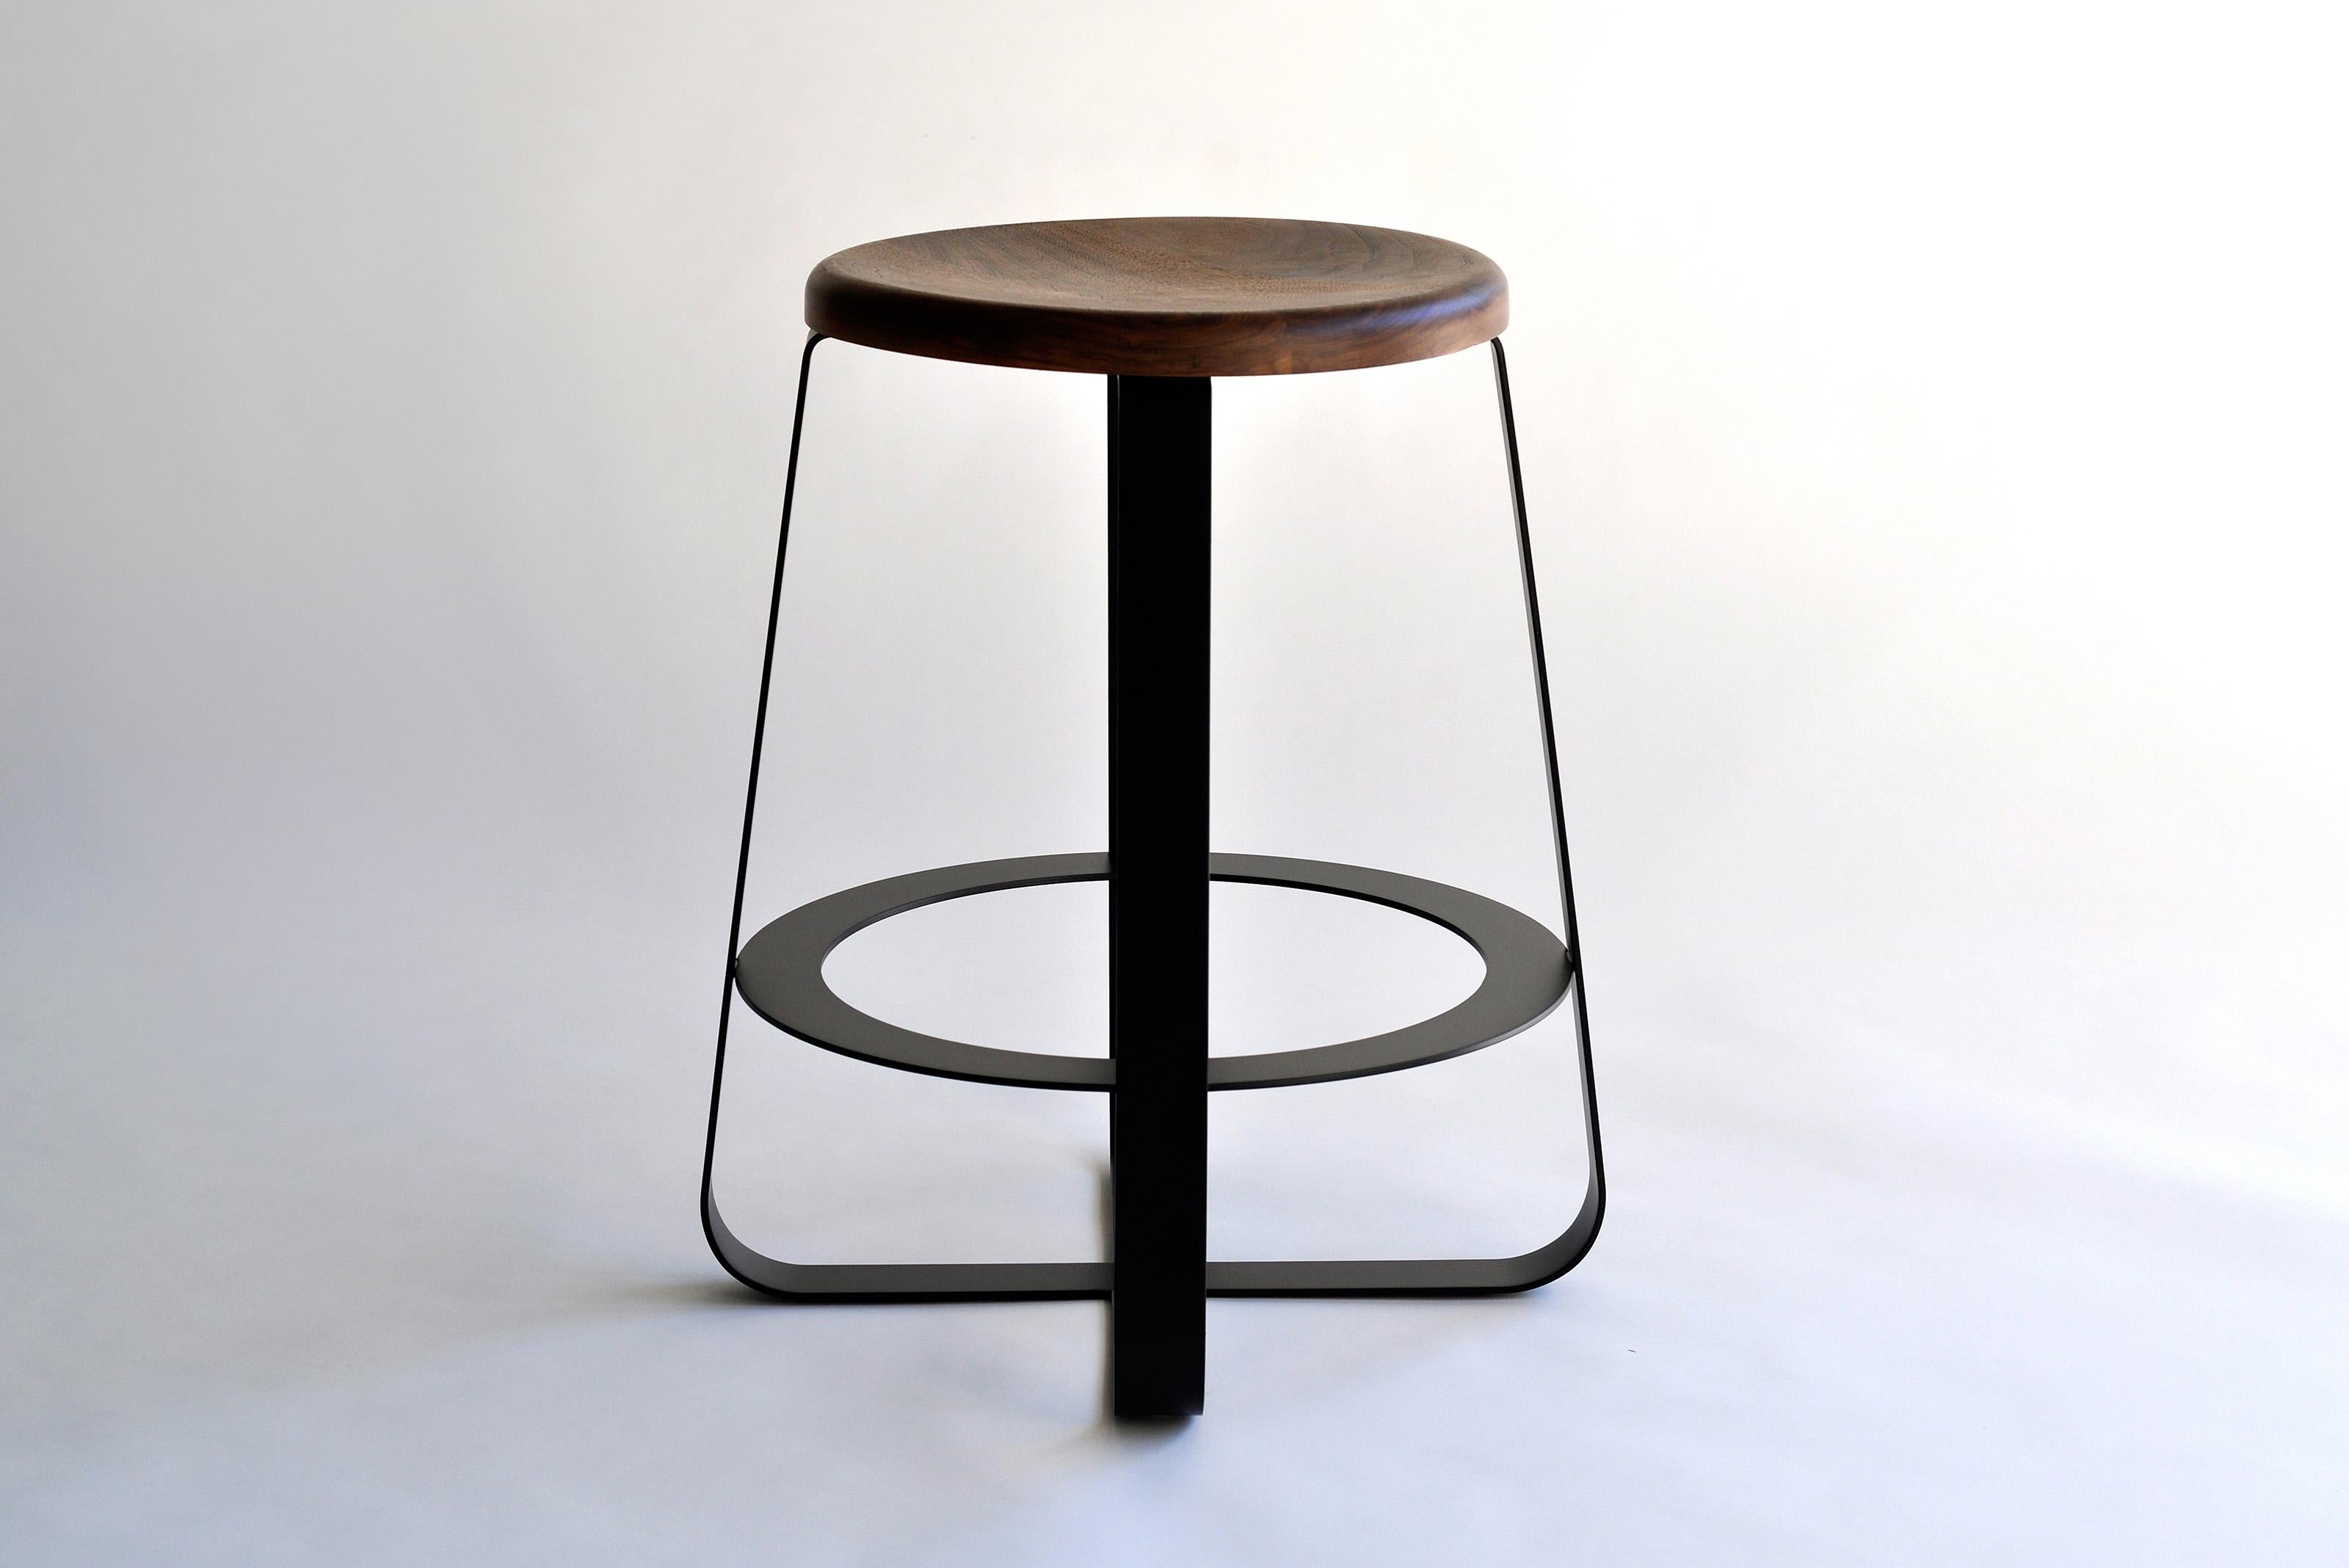 Primi Counter Stool by Phase Design
Dimensions: Ø 54.6 x H 62.2 cm. 
Materials: Powder-coated steel and walnut.

Solid steel flat bar available in a flat black or white powder coat finish with carved walnut, white ash, or upholstered top. Powder